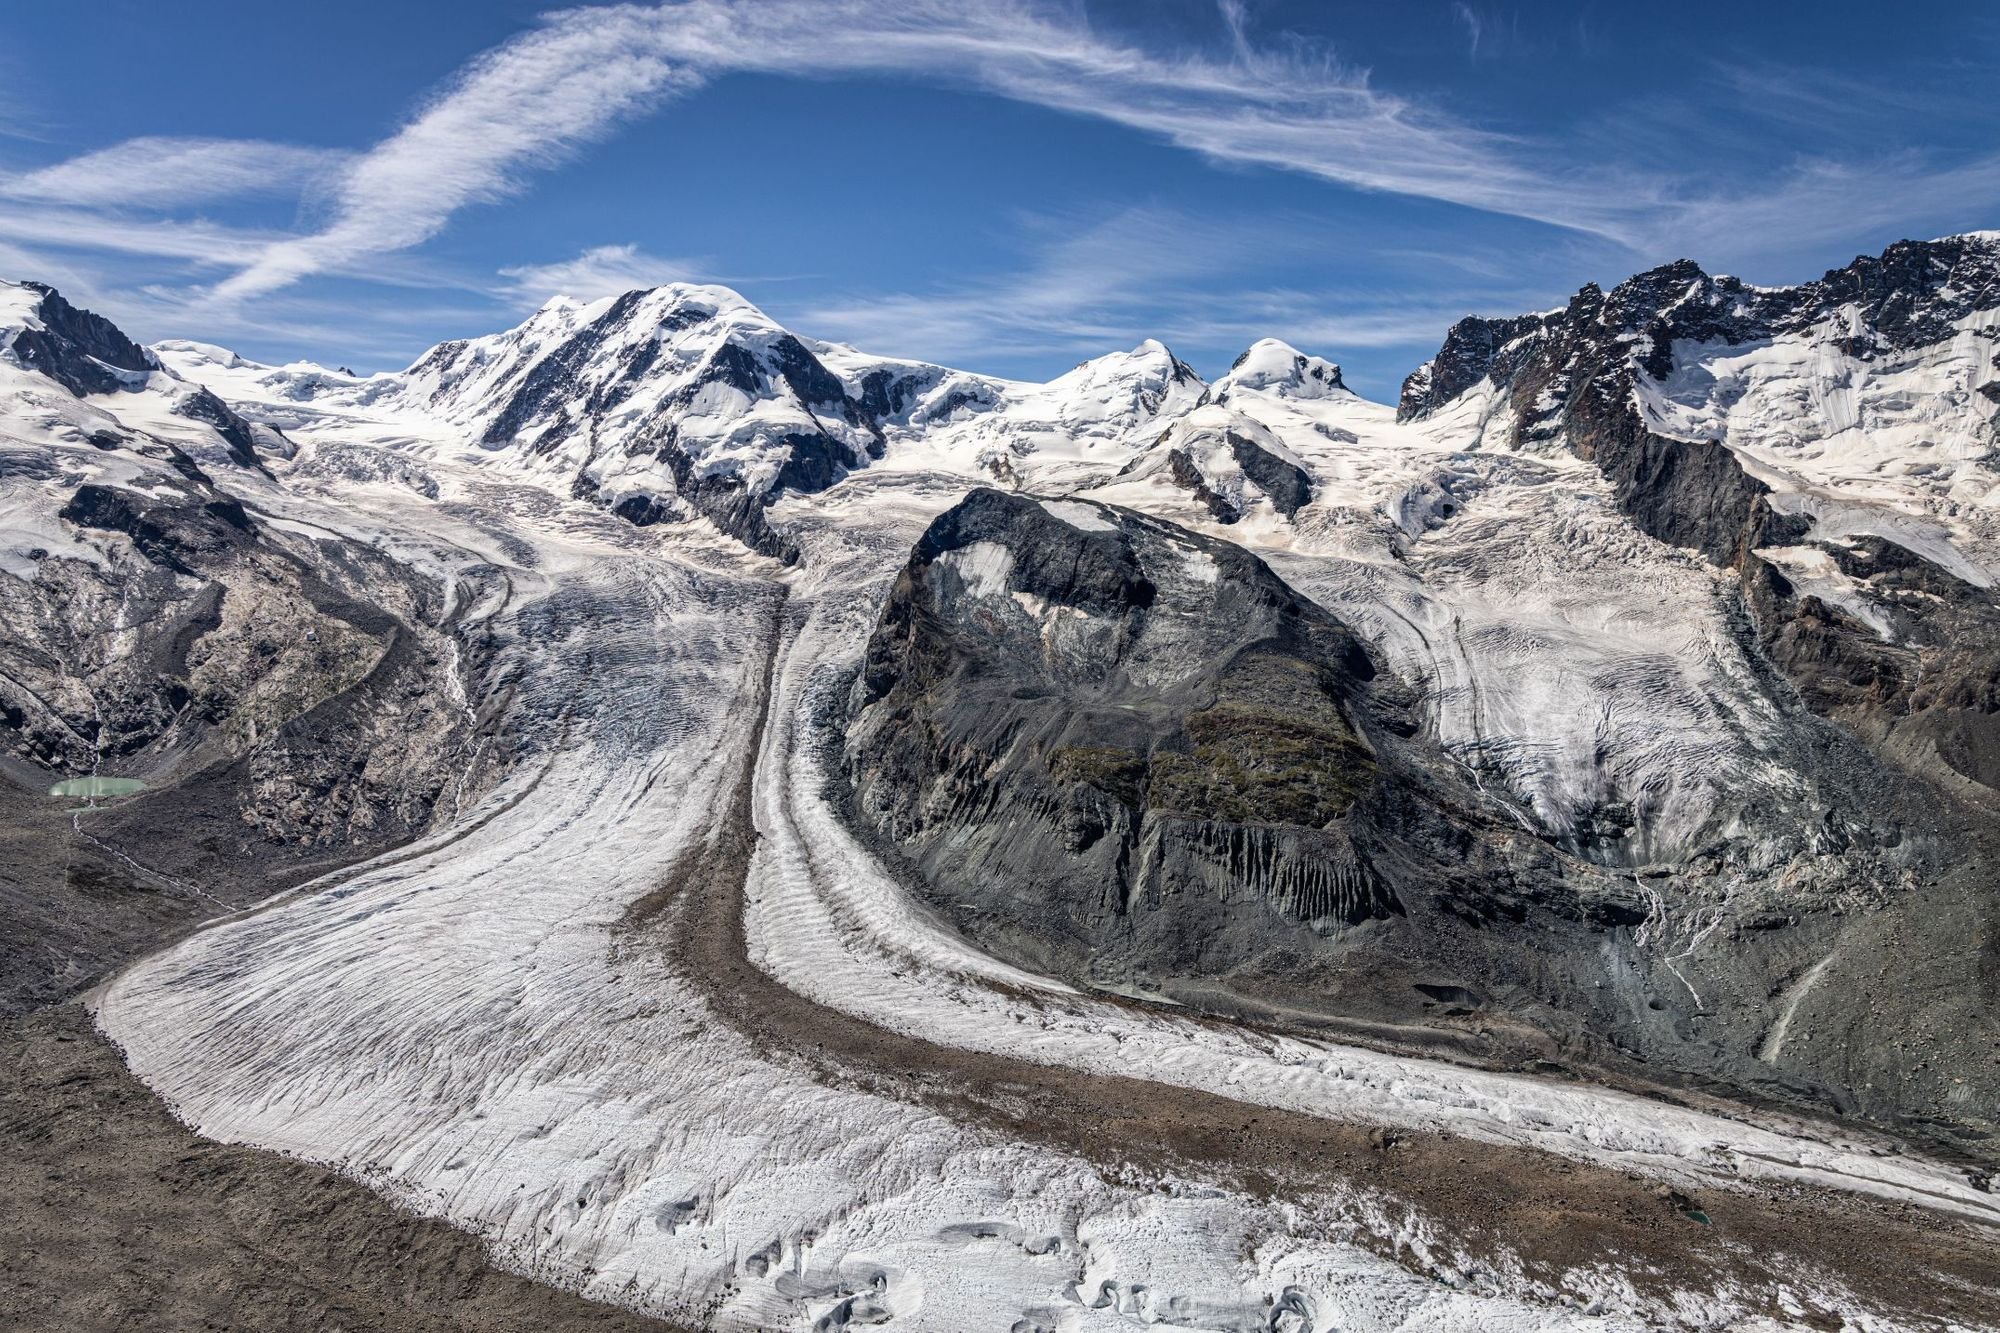 Gorner and Grenz glacier, with the Monte Rosa massif on the left, including the peaks Nordend and the Dufourspitze. In the middle is the Lyskamm and on the right side the twins Castor and Pollux. The view is from the top of Gornergrat Mountain in Zermatt. Photo: Getty